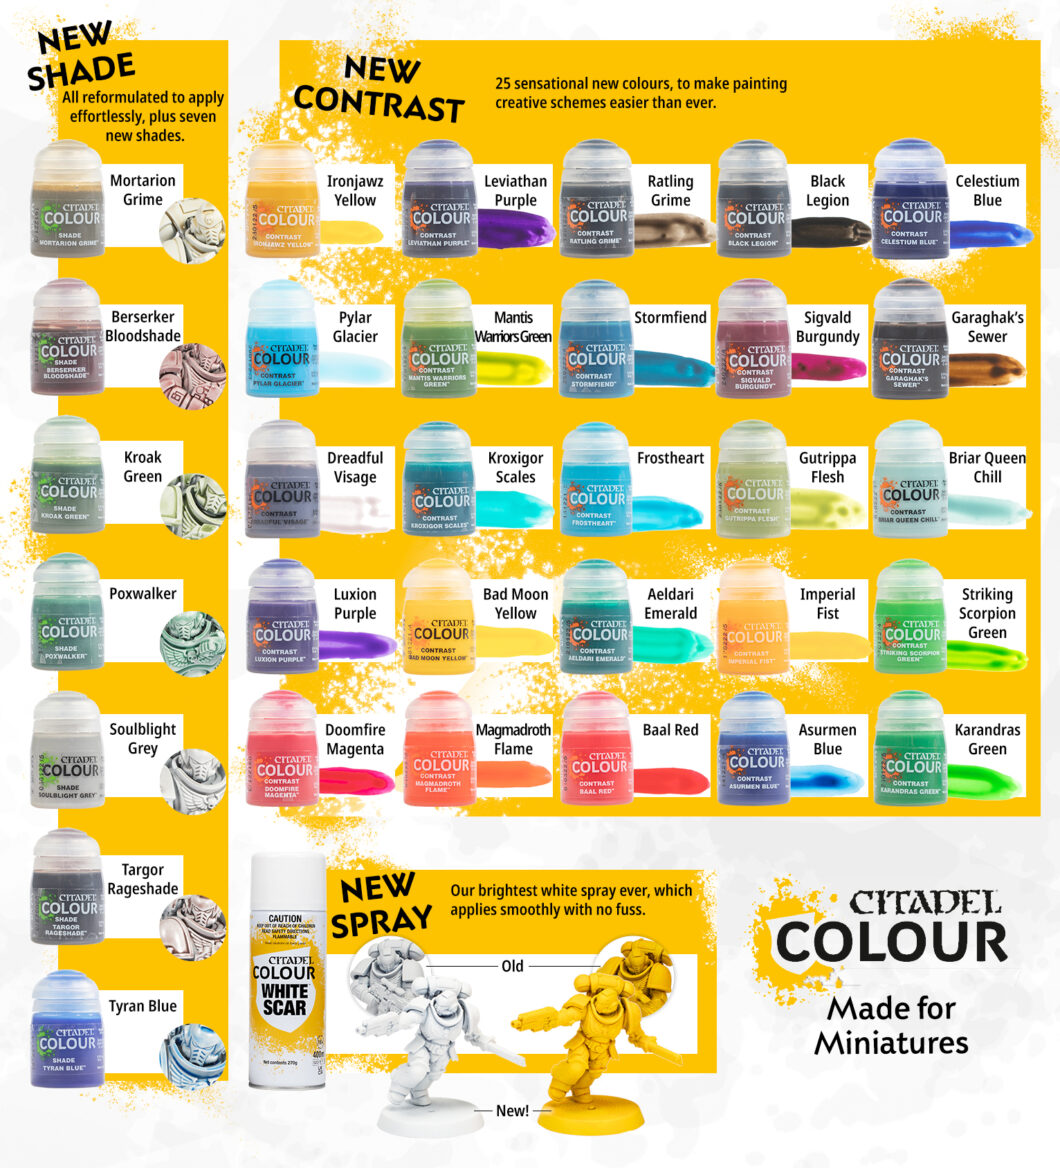 A New Era of Paints – New Contrast Colours, Reformulated Shades